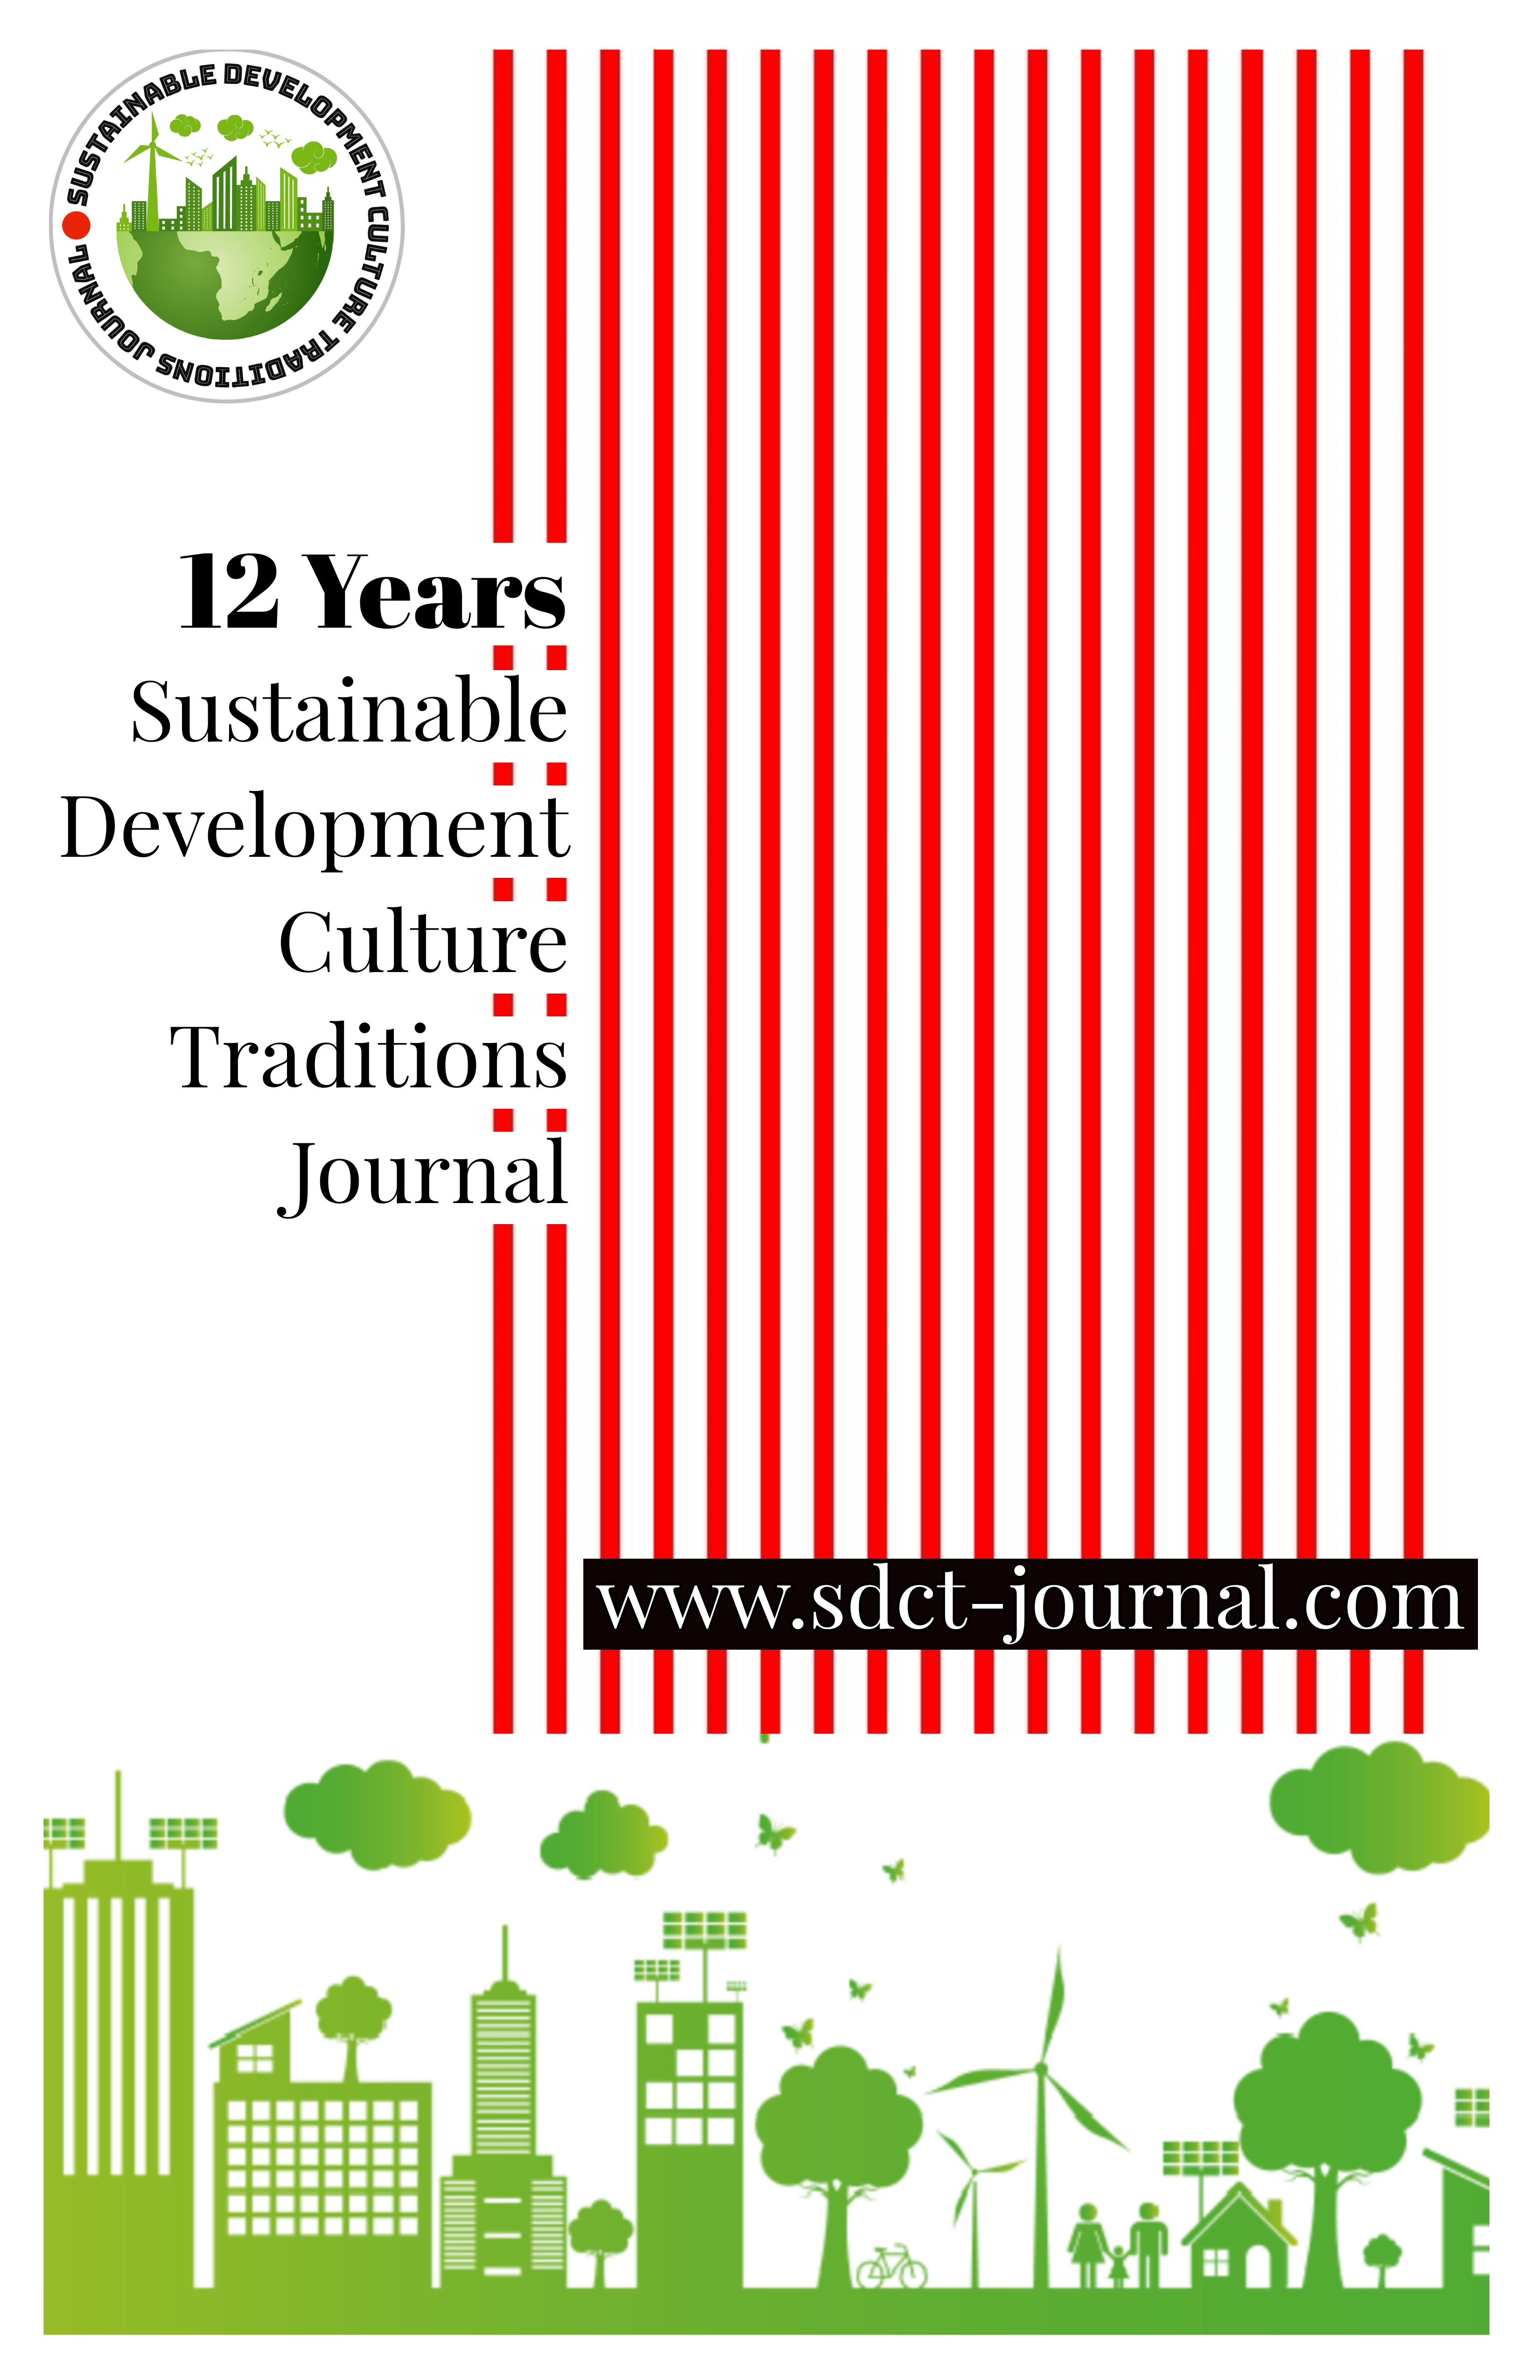 12 YEARS SUSTAINABLE DEVELOPMENT CULTURE TRADITIONS new